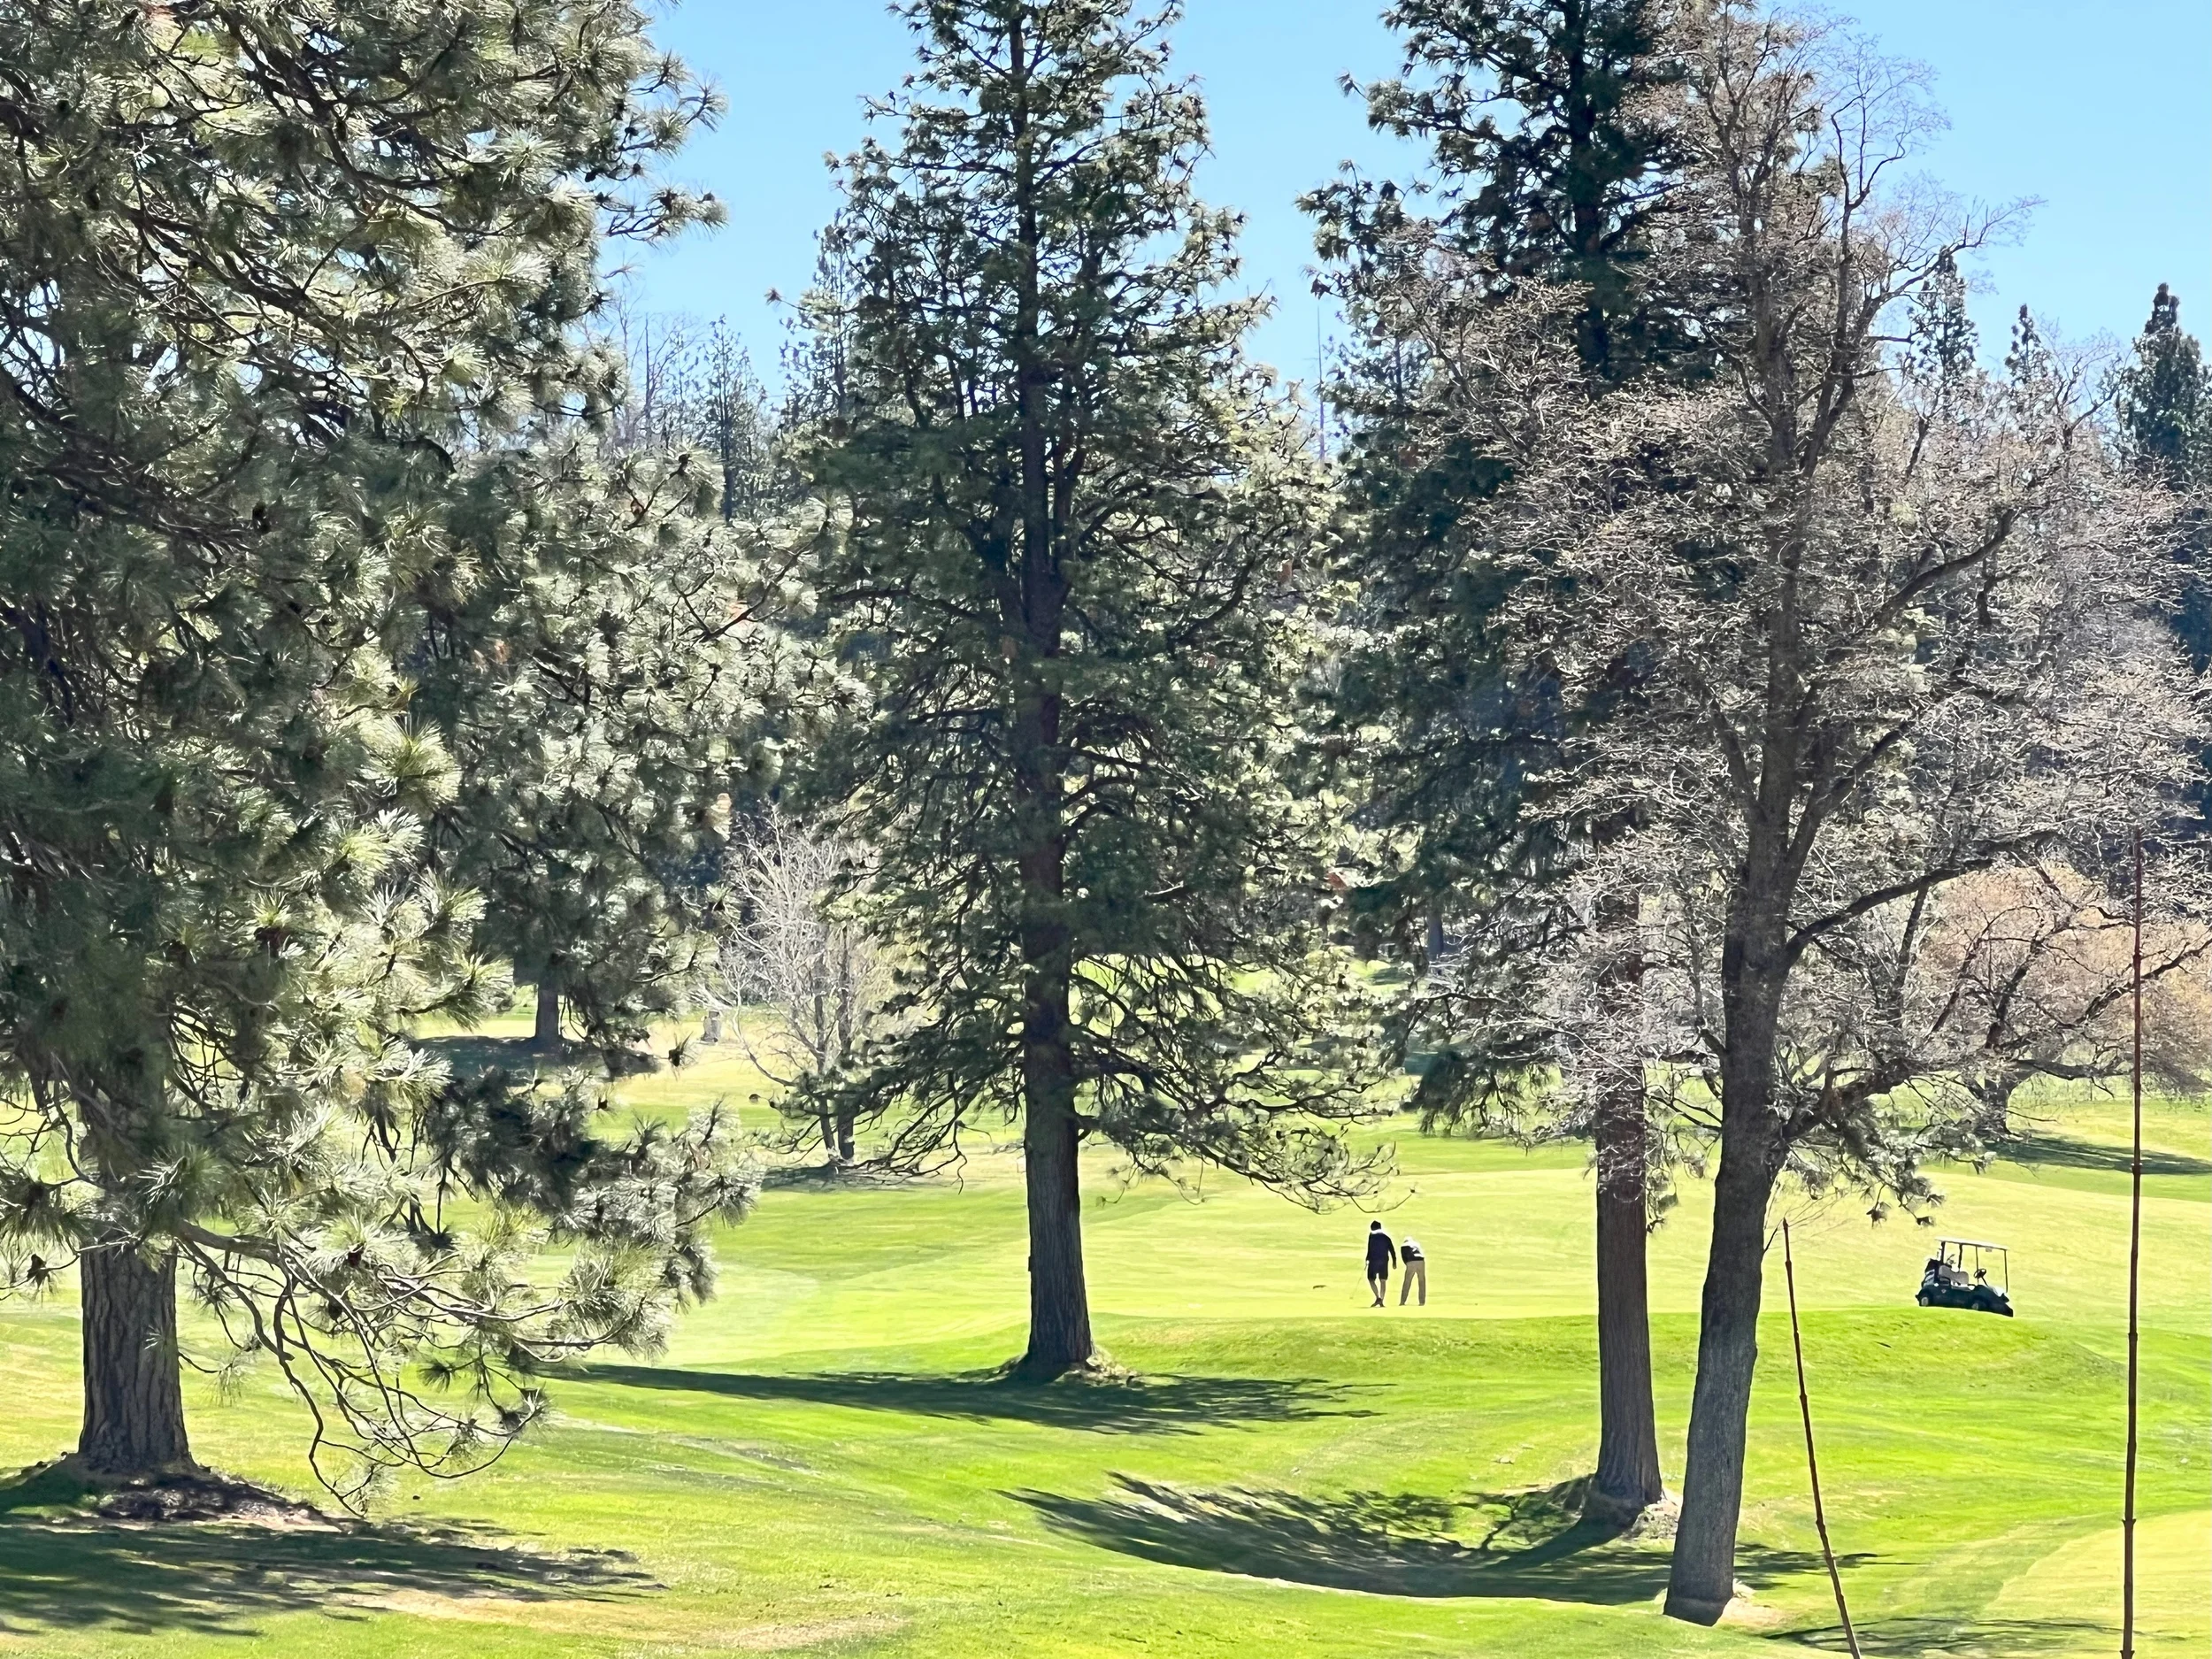 golf course in pine trees